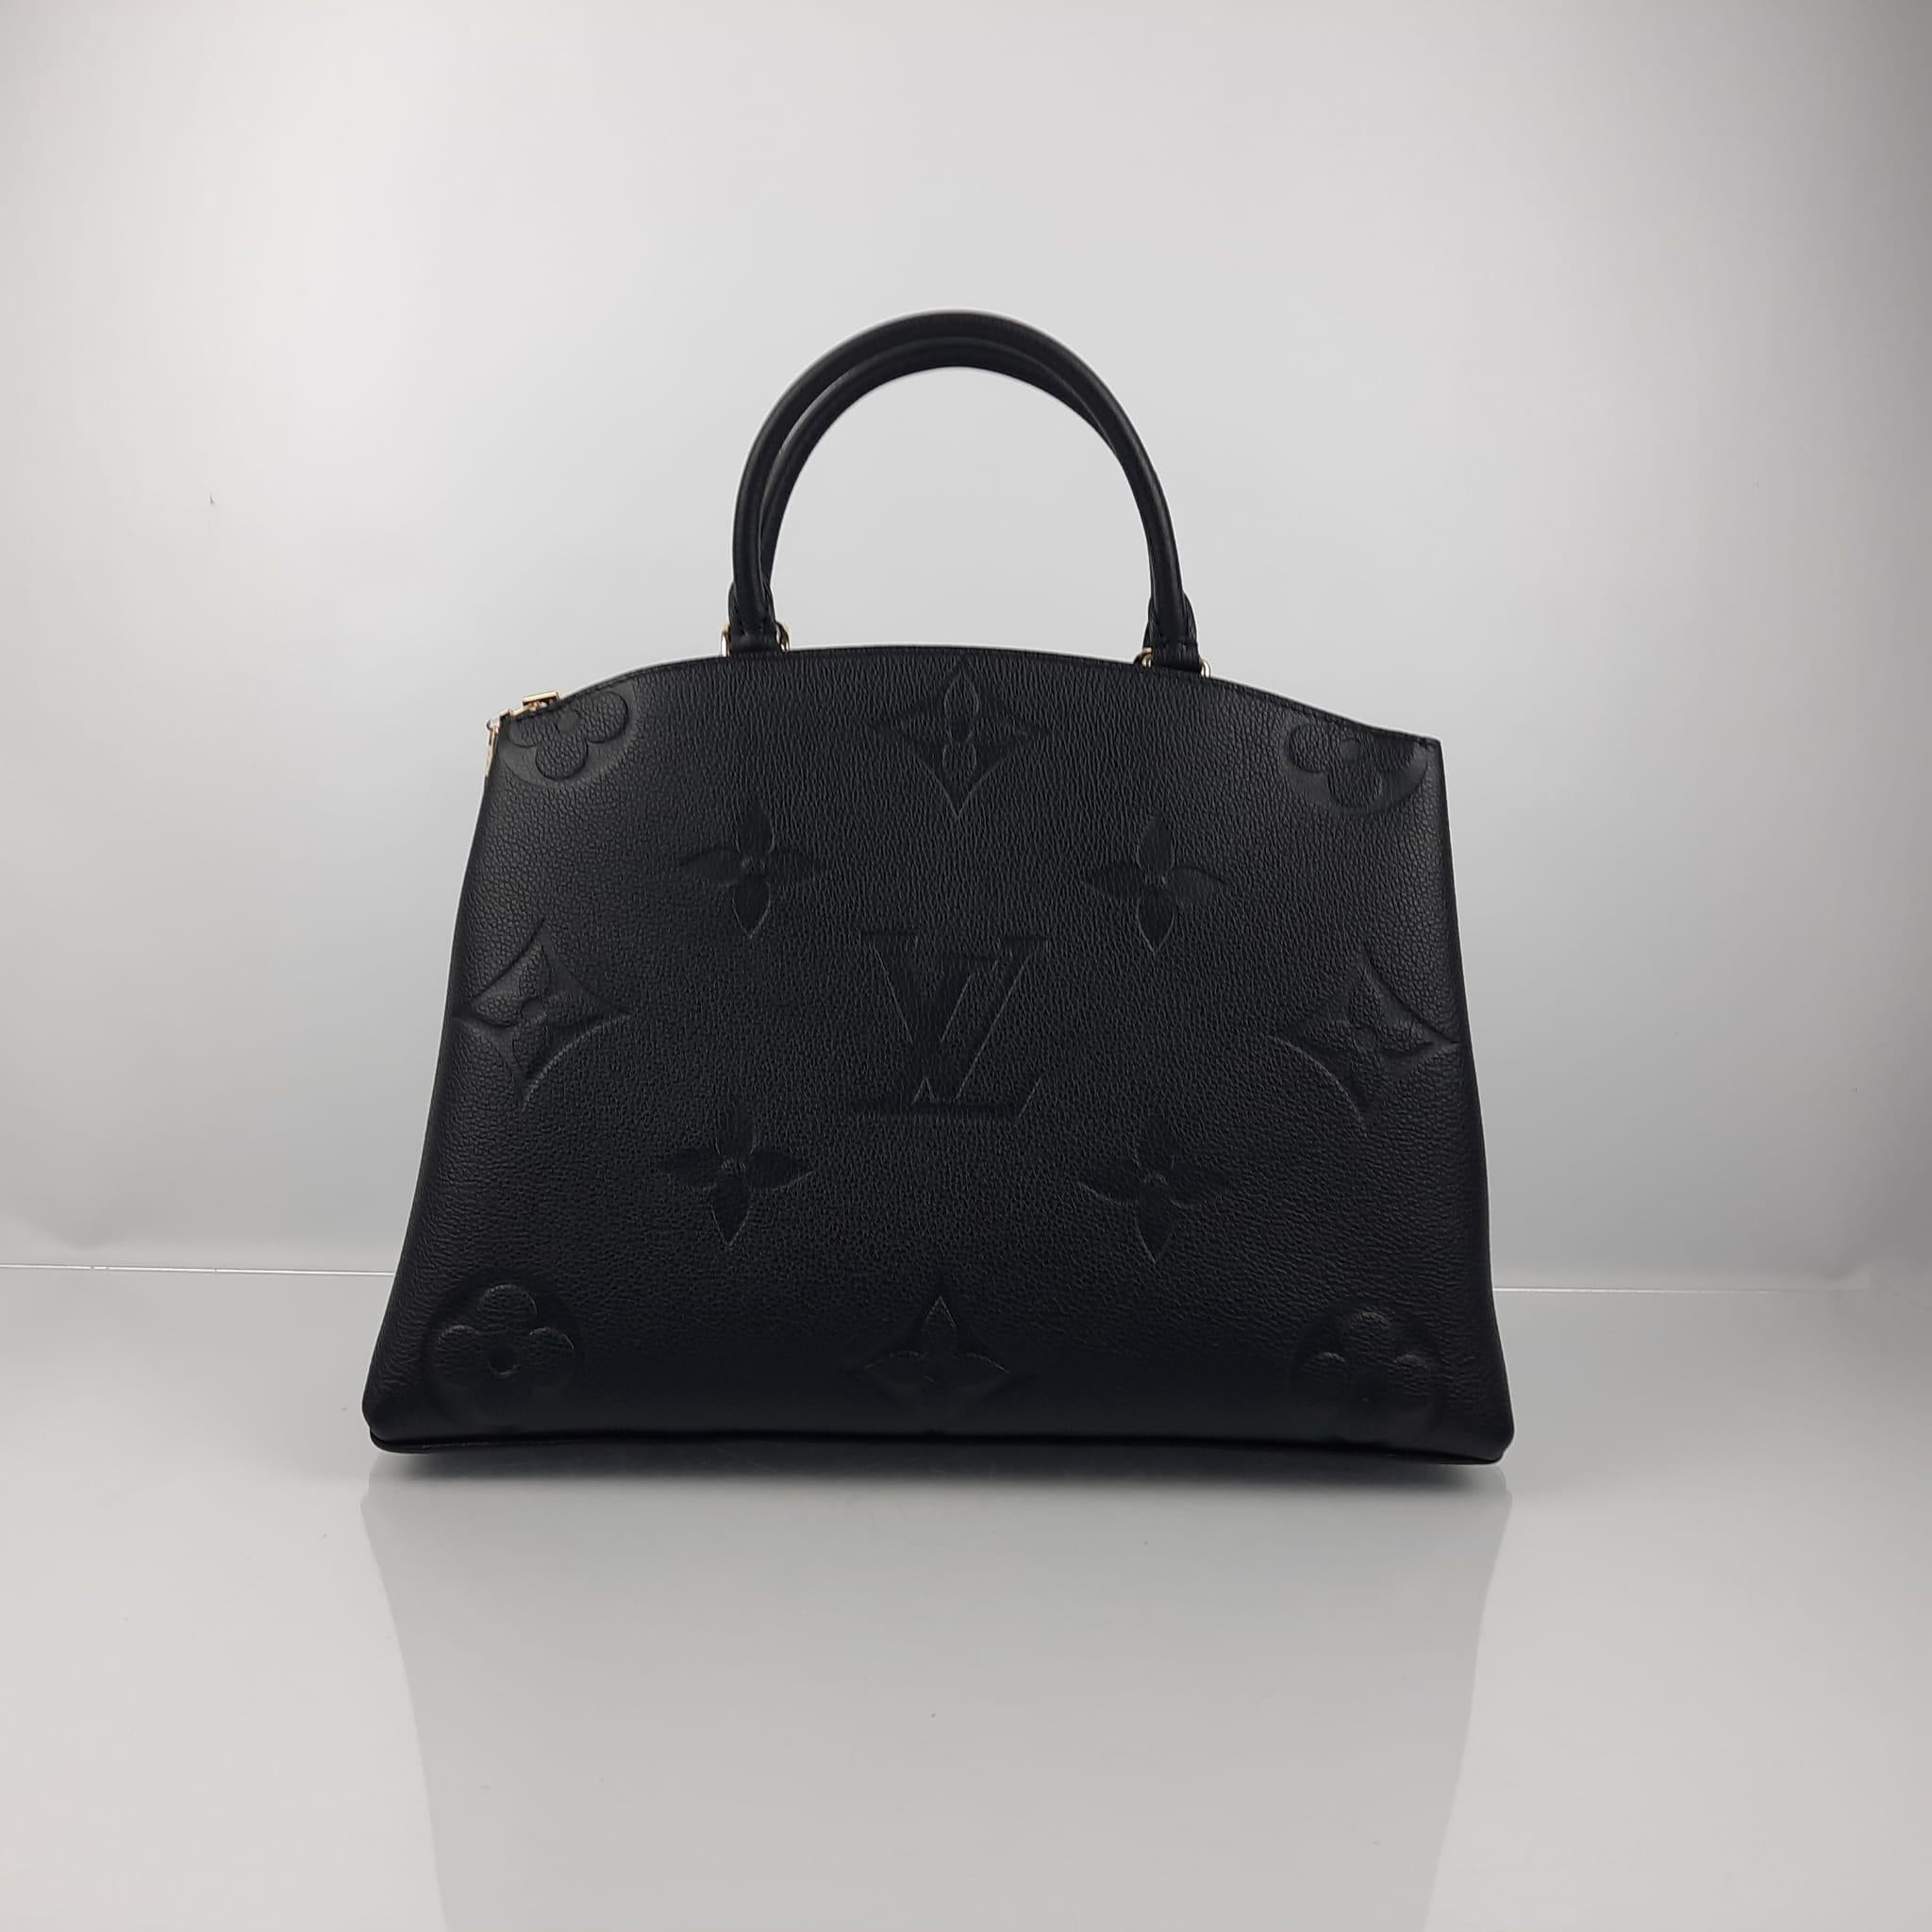 Louis Vuitton Grand Palais bag Black Monogram Empreinte Leather In New Condition For Sale In Nicosia, CY